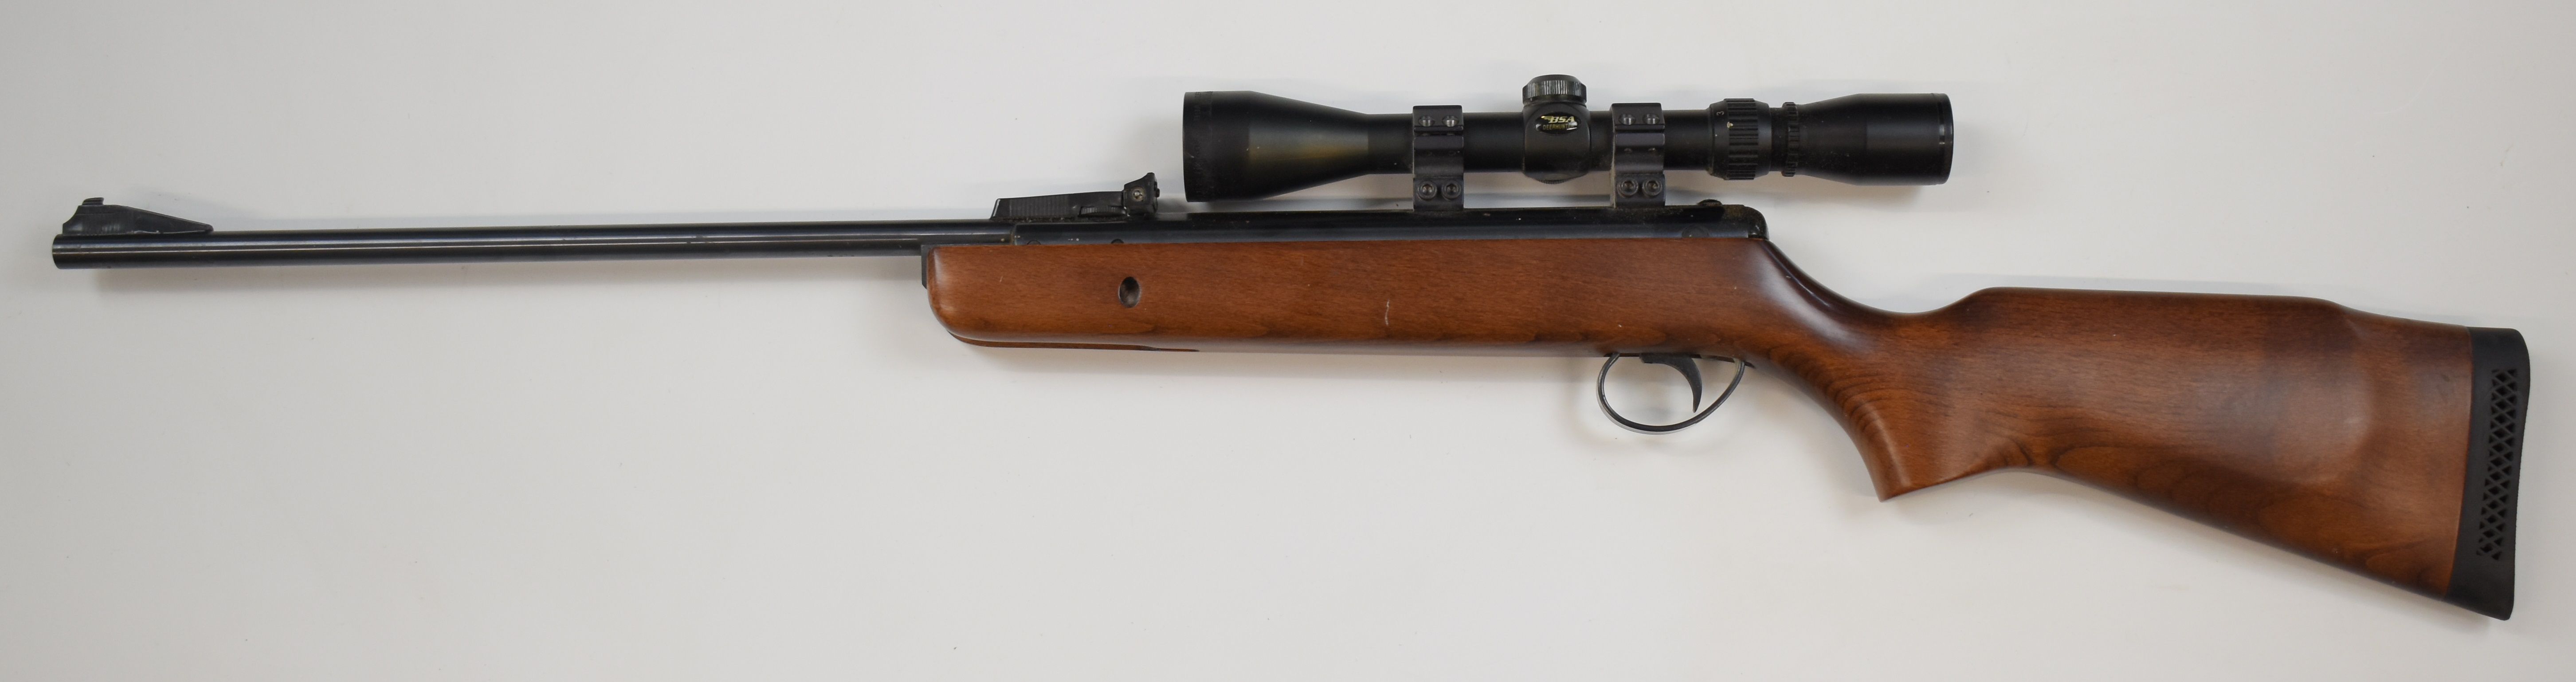 BSA Supersport .22 air rifle with semi-pistol grip, raised cheek piece, adjustable trigger and BSA - Image 6 of 9